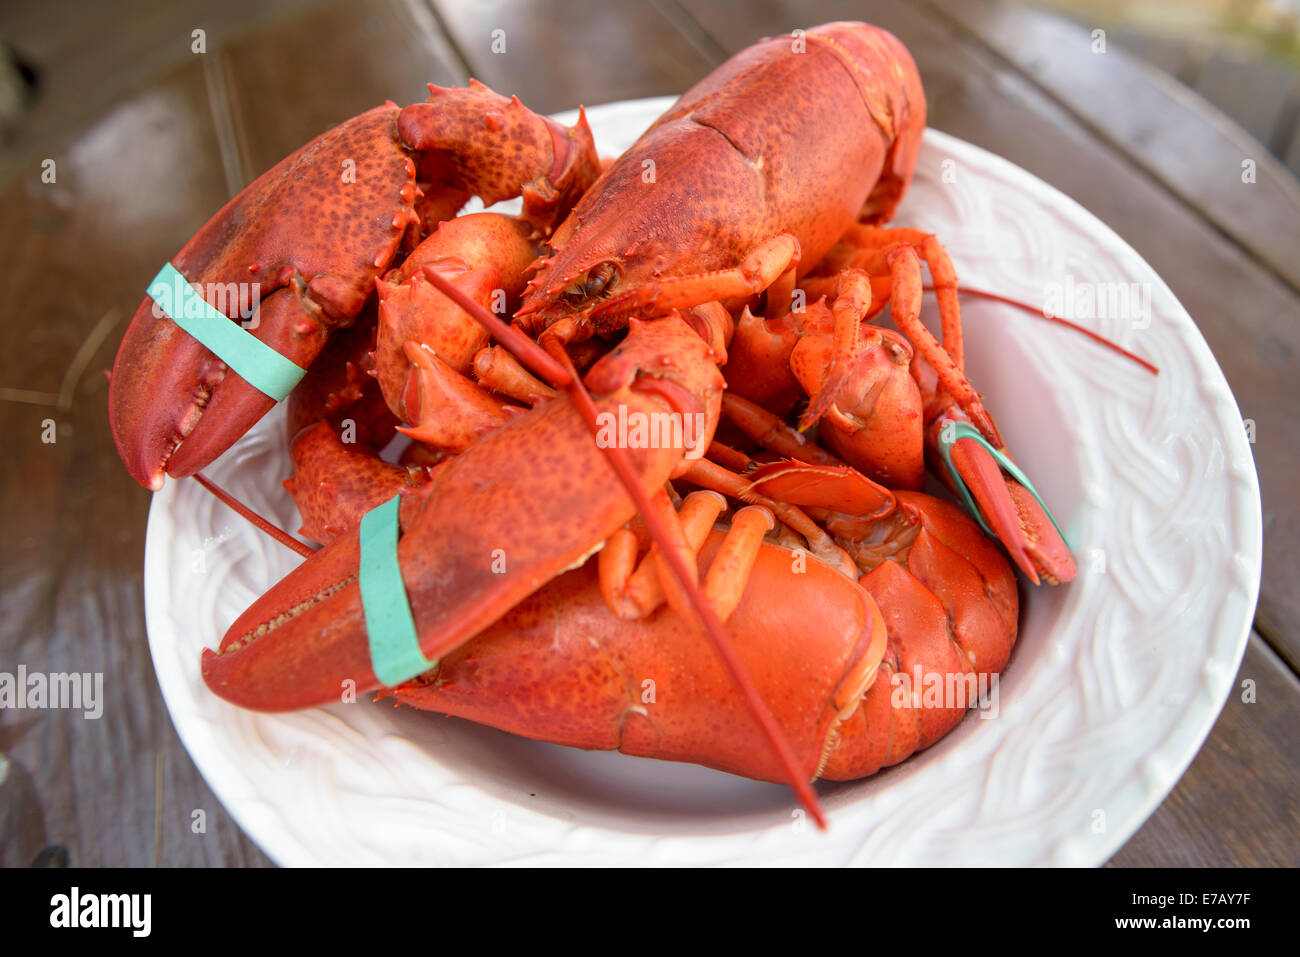 Fresh steamed Maine lobster ready to crack open and eat, Bar Harbor, Maine, USA. Stock Photo